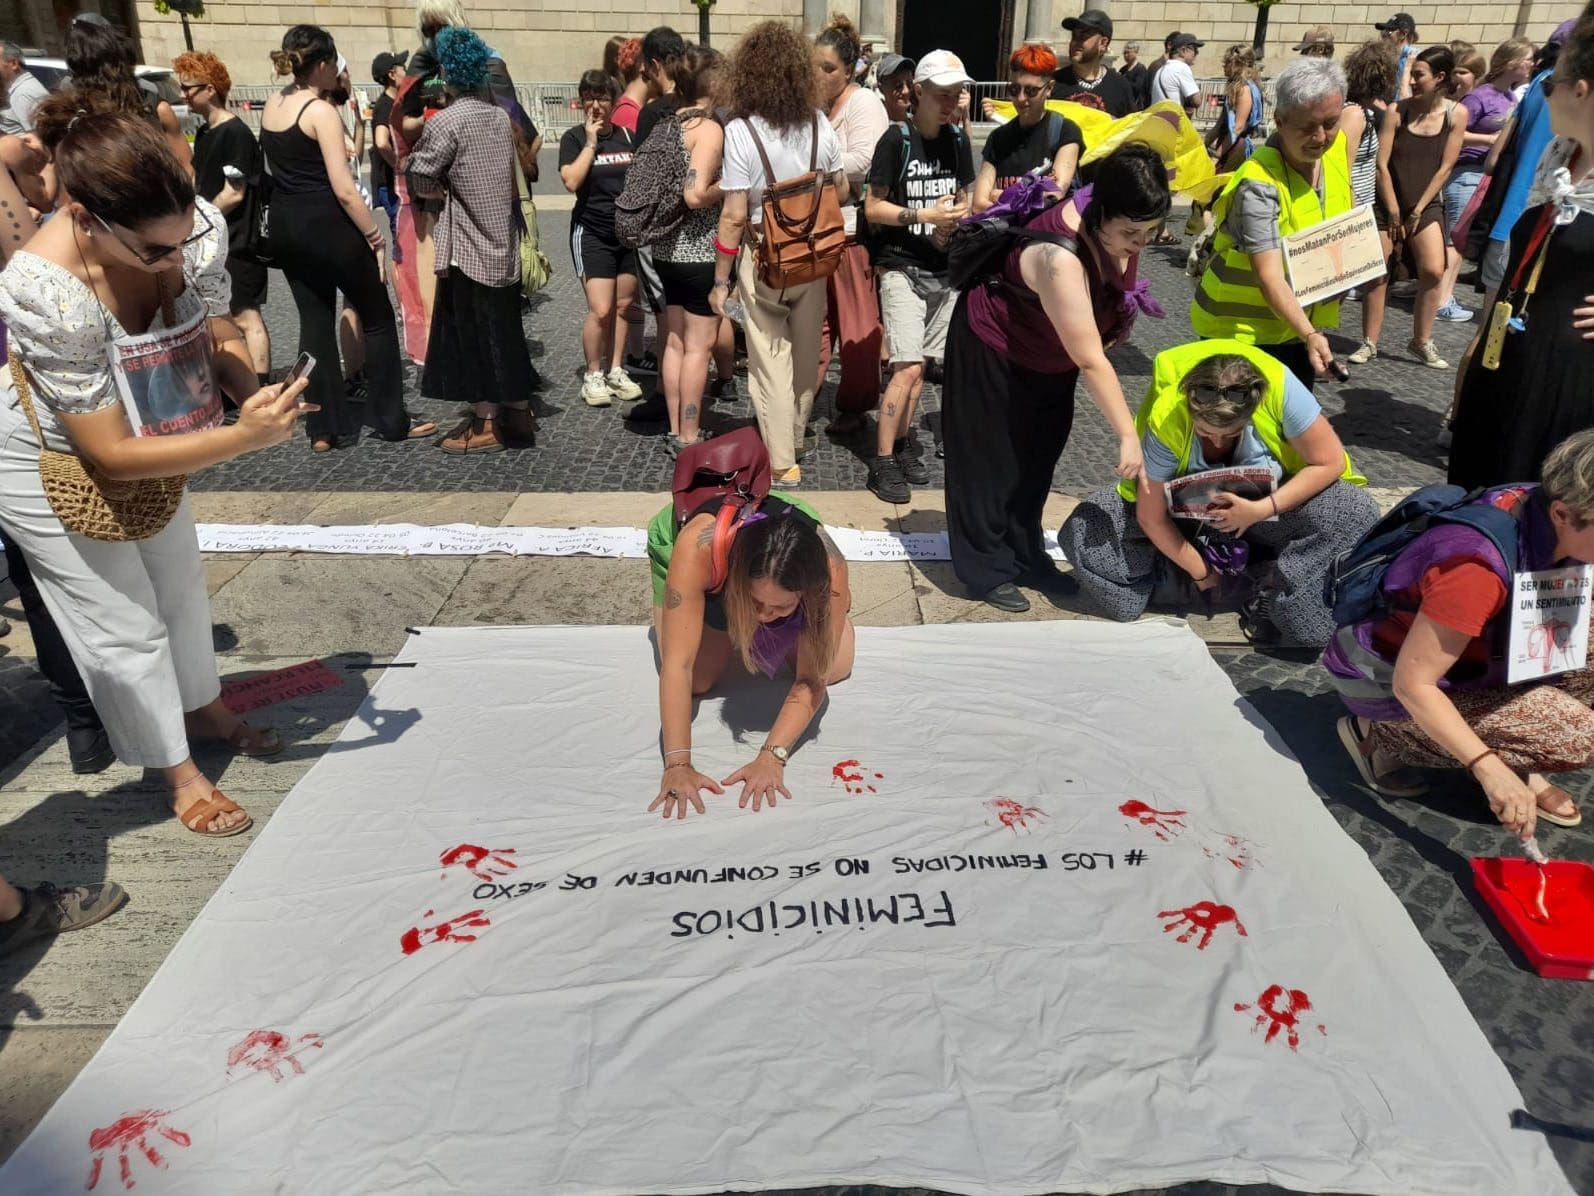 Women gathered on the streets leaving handprints on the banner "No Feminicidios" (Say no to murdering women )